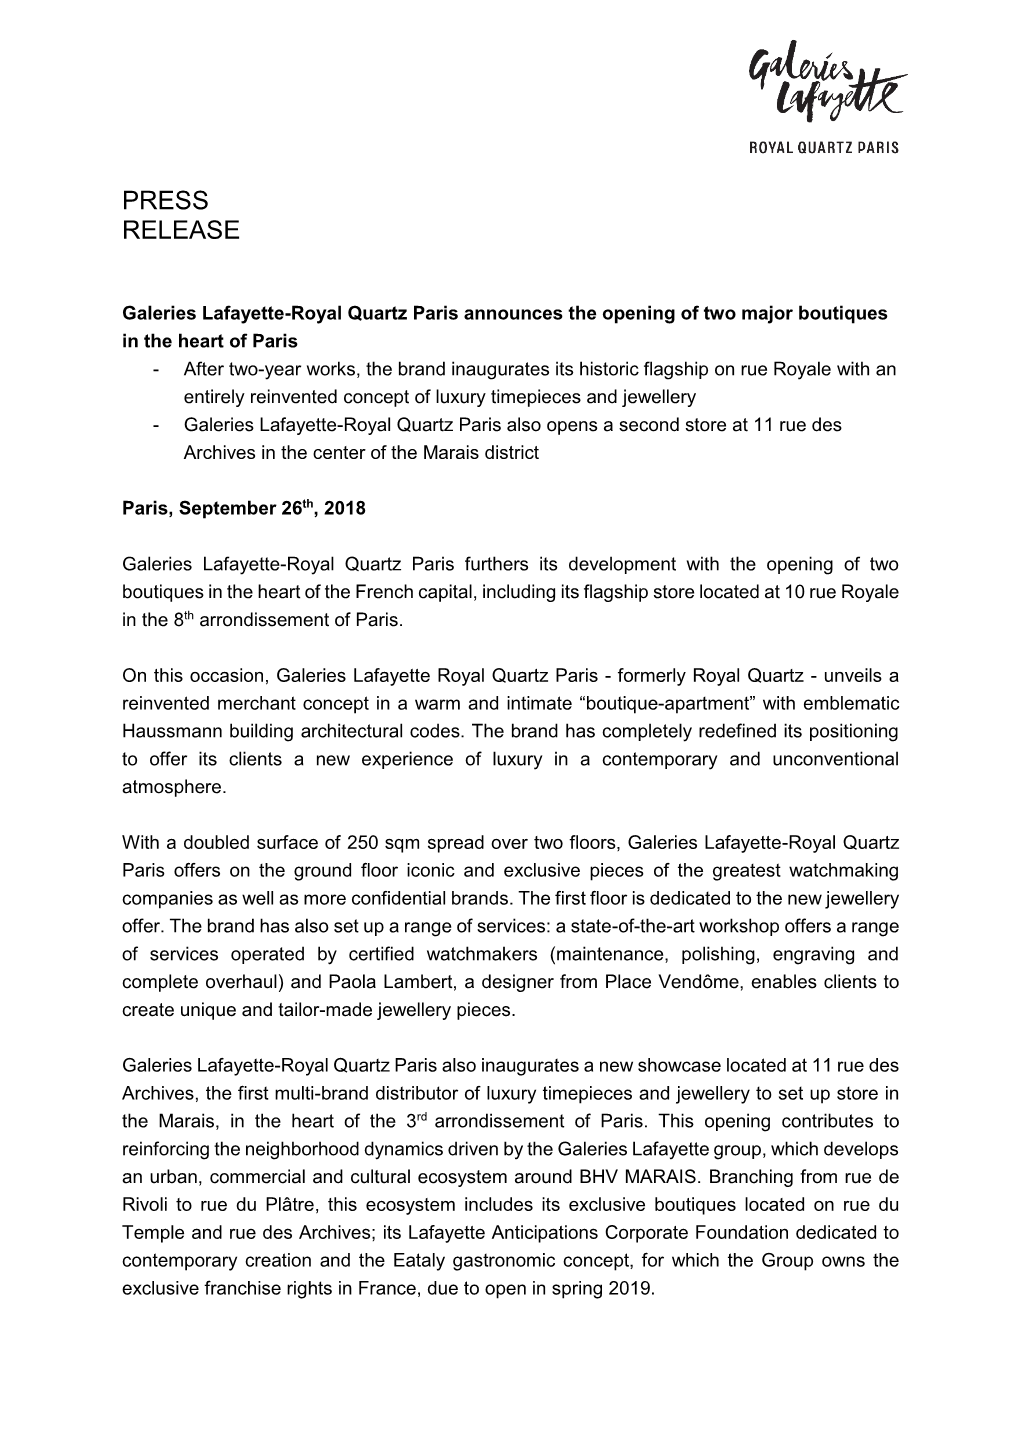 Download the Press Release